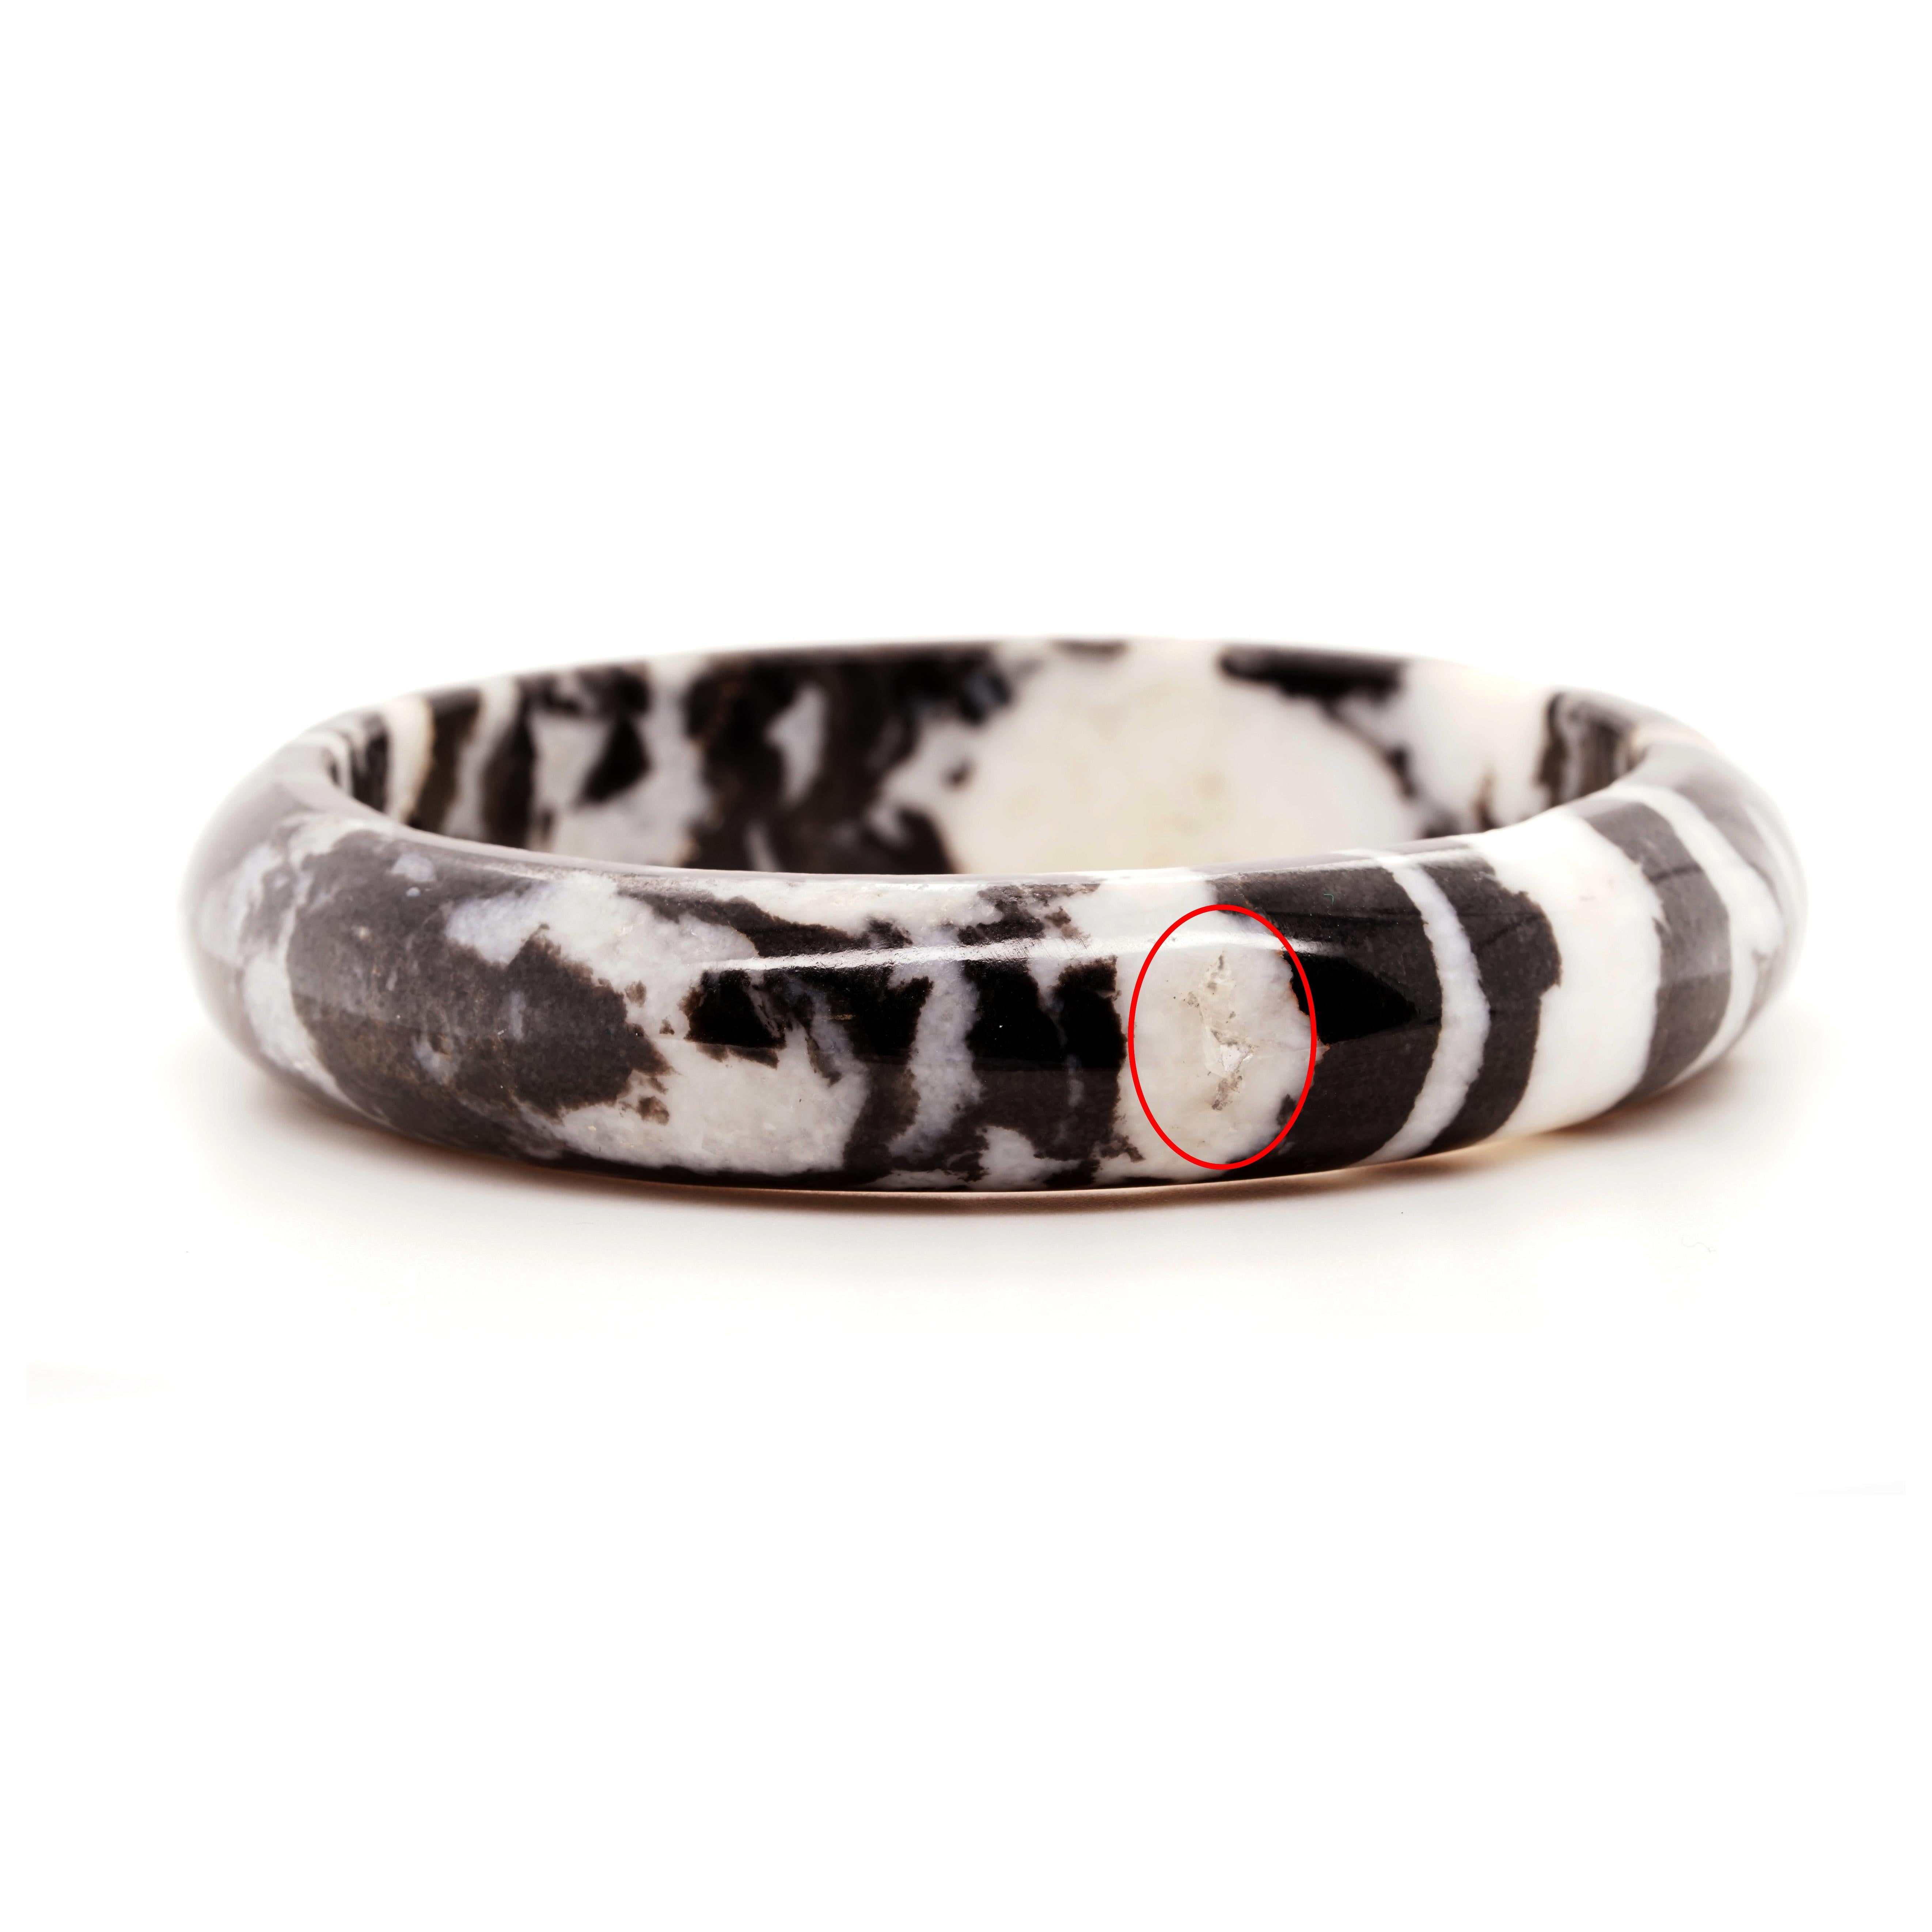 The Zebra Jasper Bangle is characterised by its striking black and white banding reminiscent of a zebra's stripes. The unique inclusions on the stone show their great age and natural beauty. Whether worn alone as a focal point or stacked with other